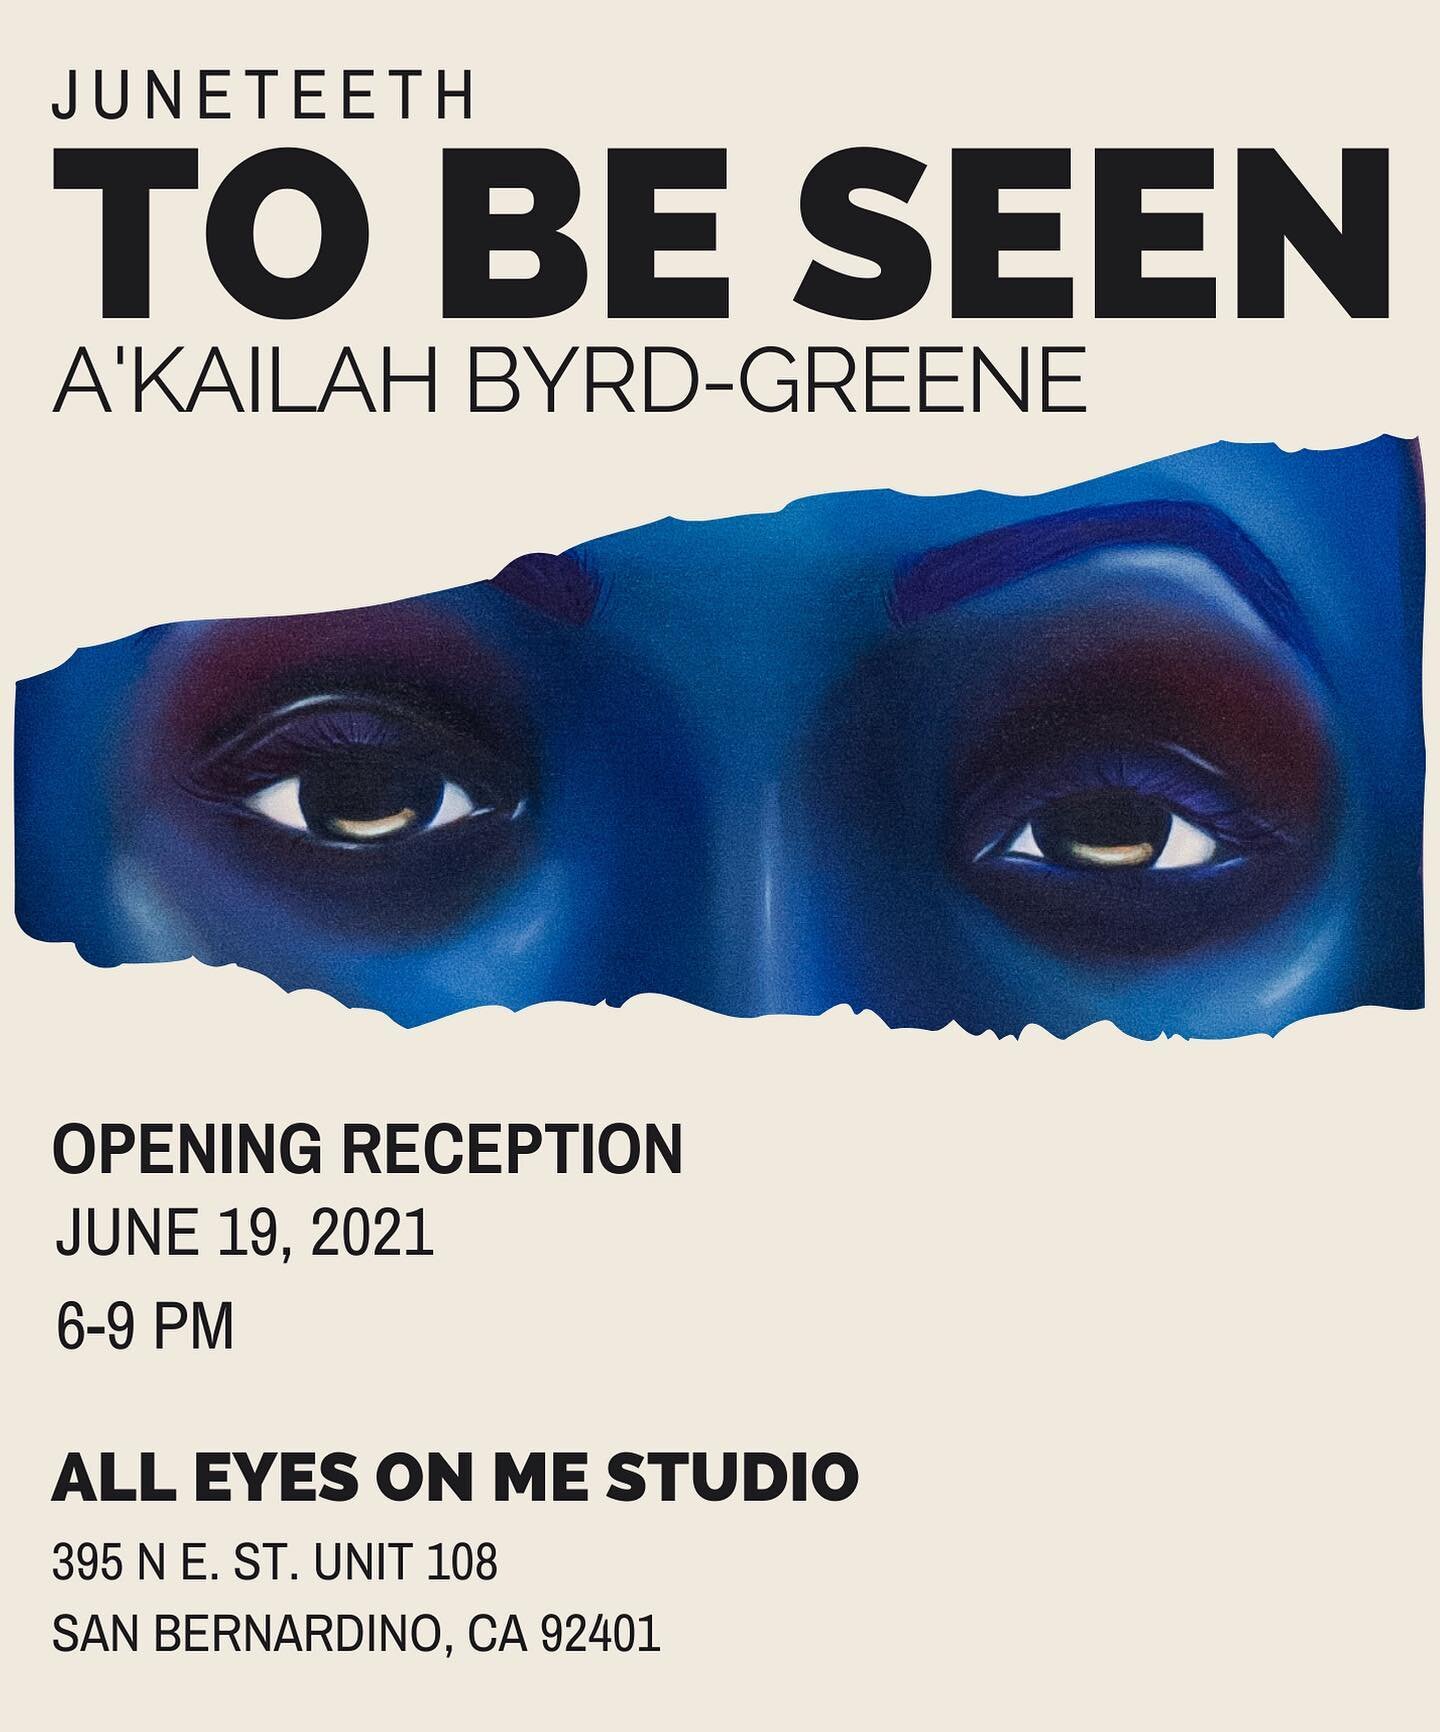 Tomorrow! Come join us at @alleyesonmestudio and celebrate my first in person solo show! ✨Excited for you all the see! 

#juneteenth #blacklivesmatter #blackart #blackgirlmagic #soloshow #painter #artistsoninstagram